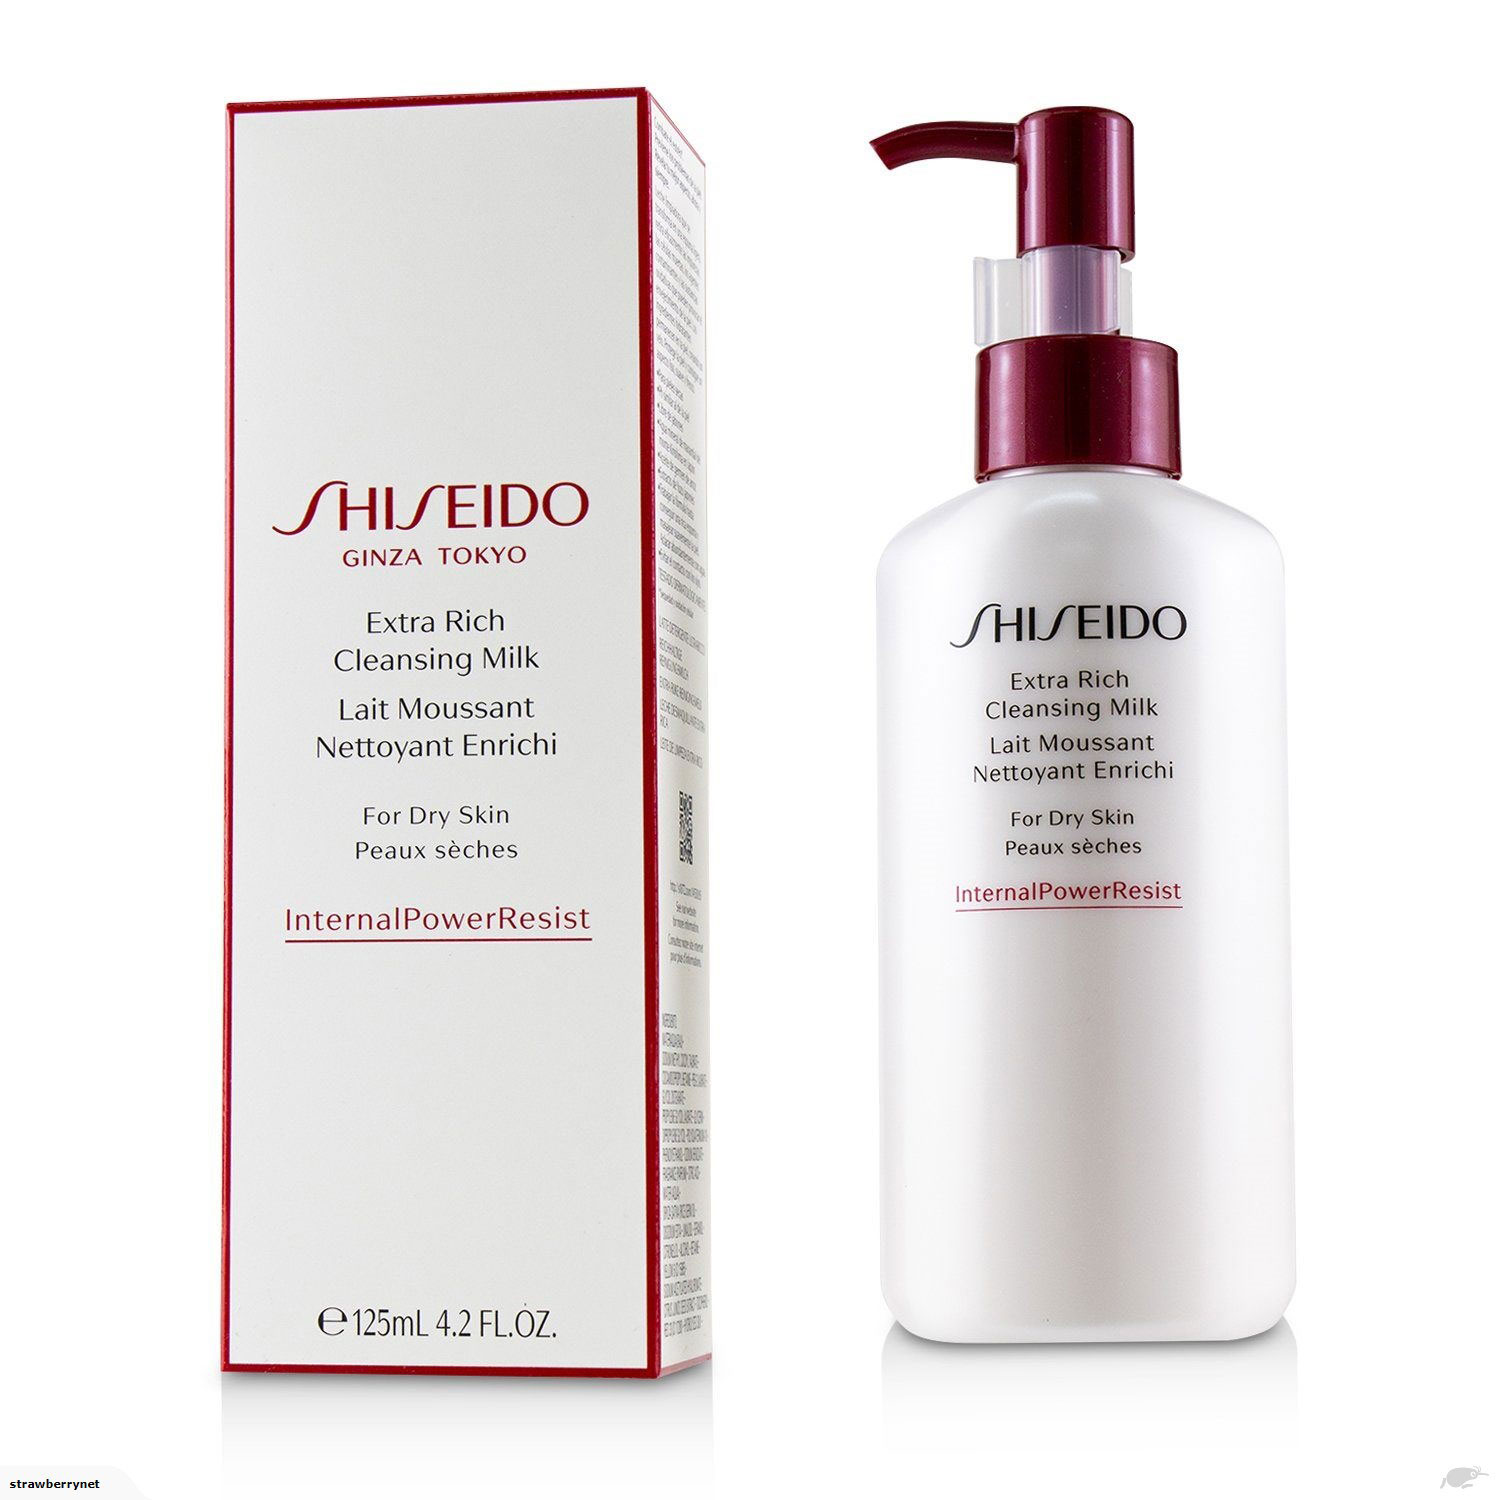 Shiseido Ginza Tokyo Extra Rich Cleansing Milk